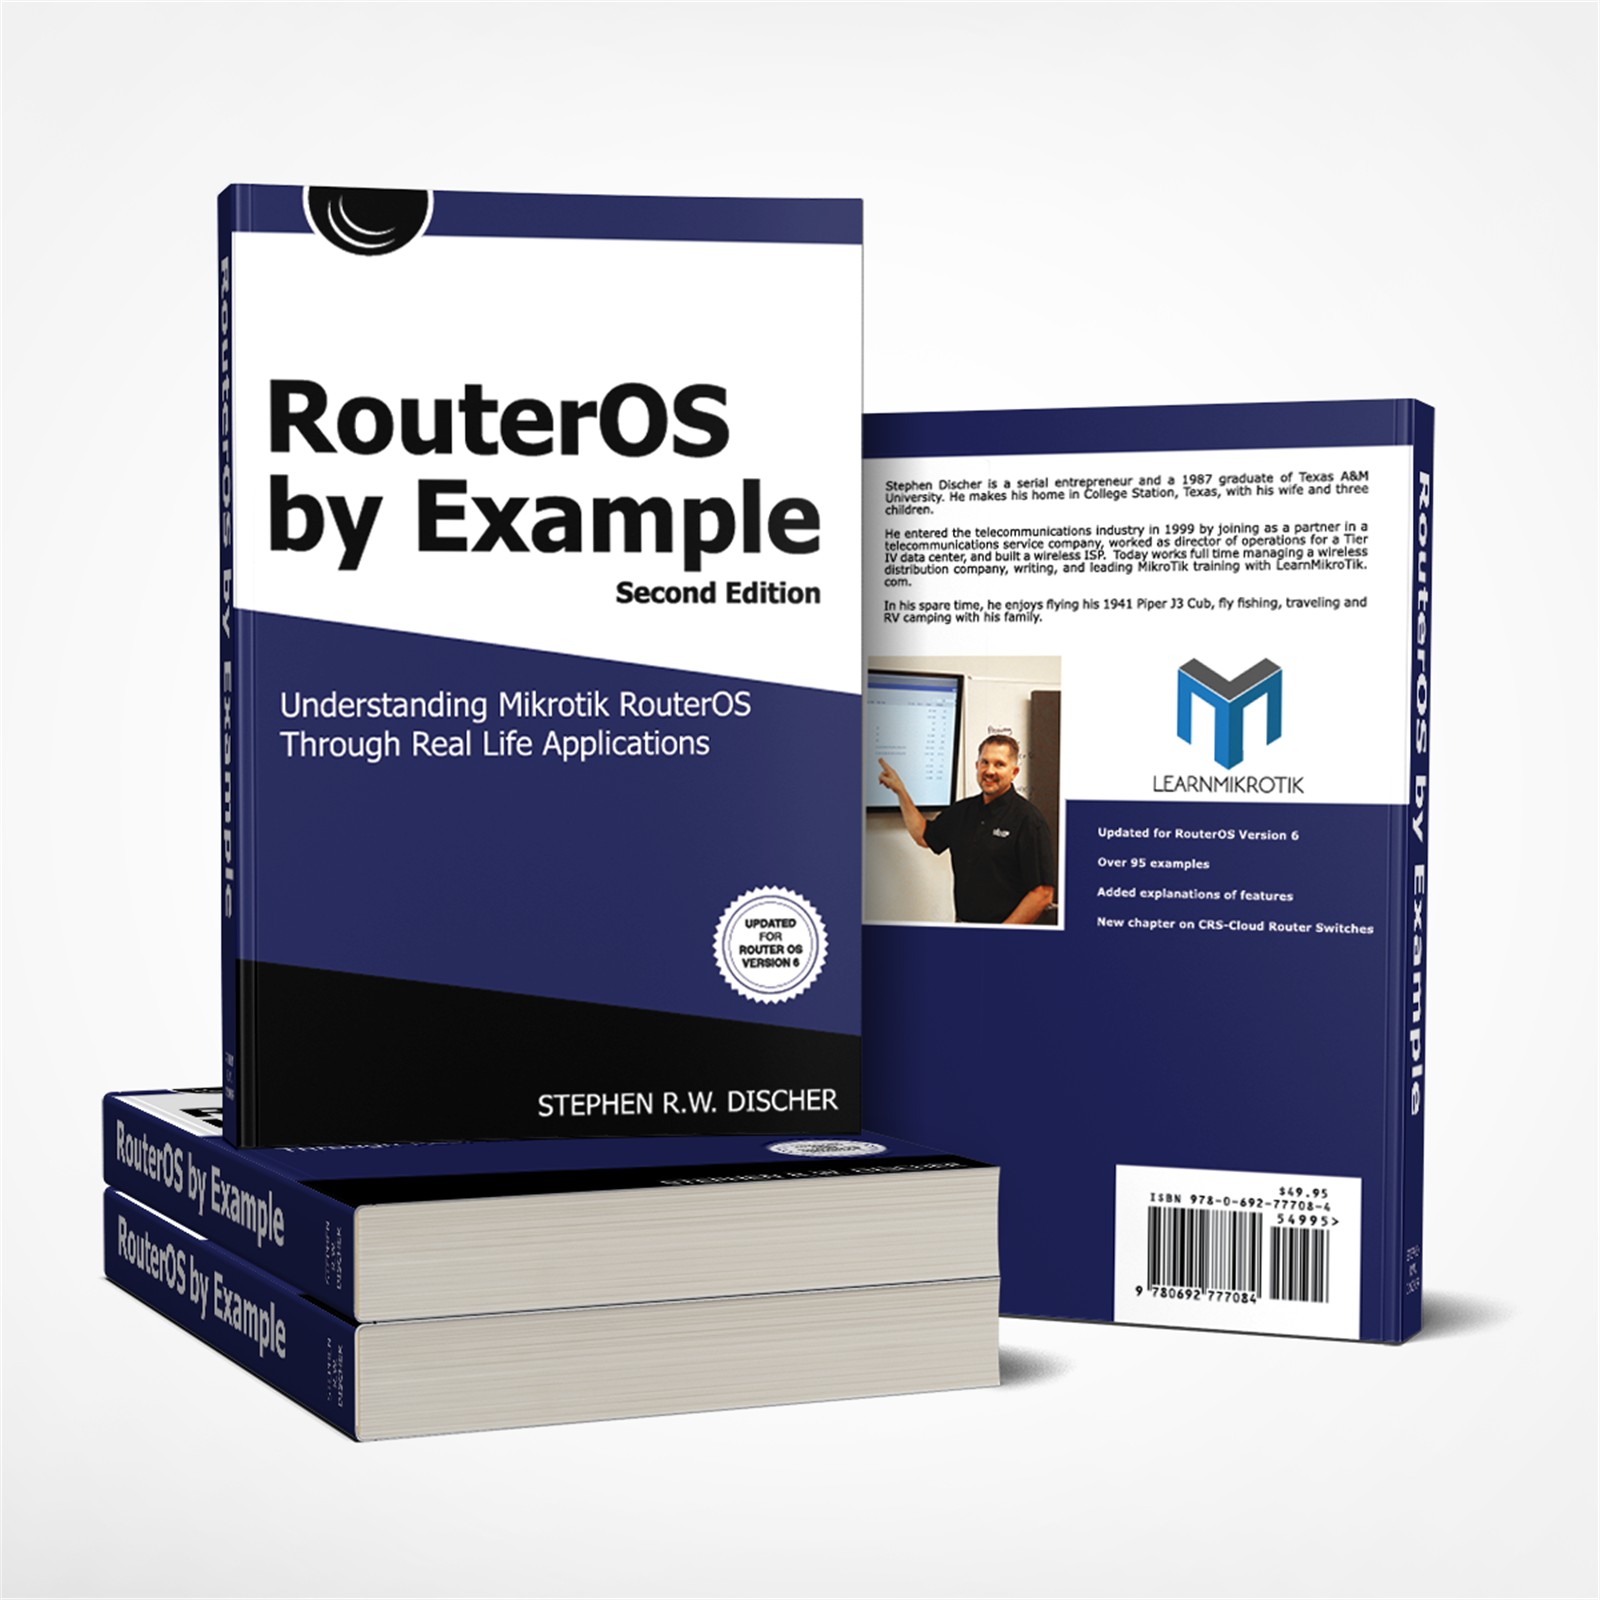 Buy the MikroTik Router OS by Example book 2nd Edition ( LMT-B2 ) online -  PBTech.com/au